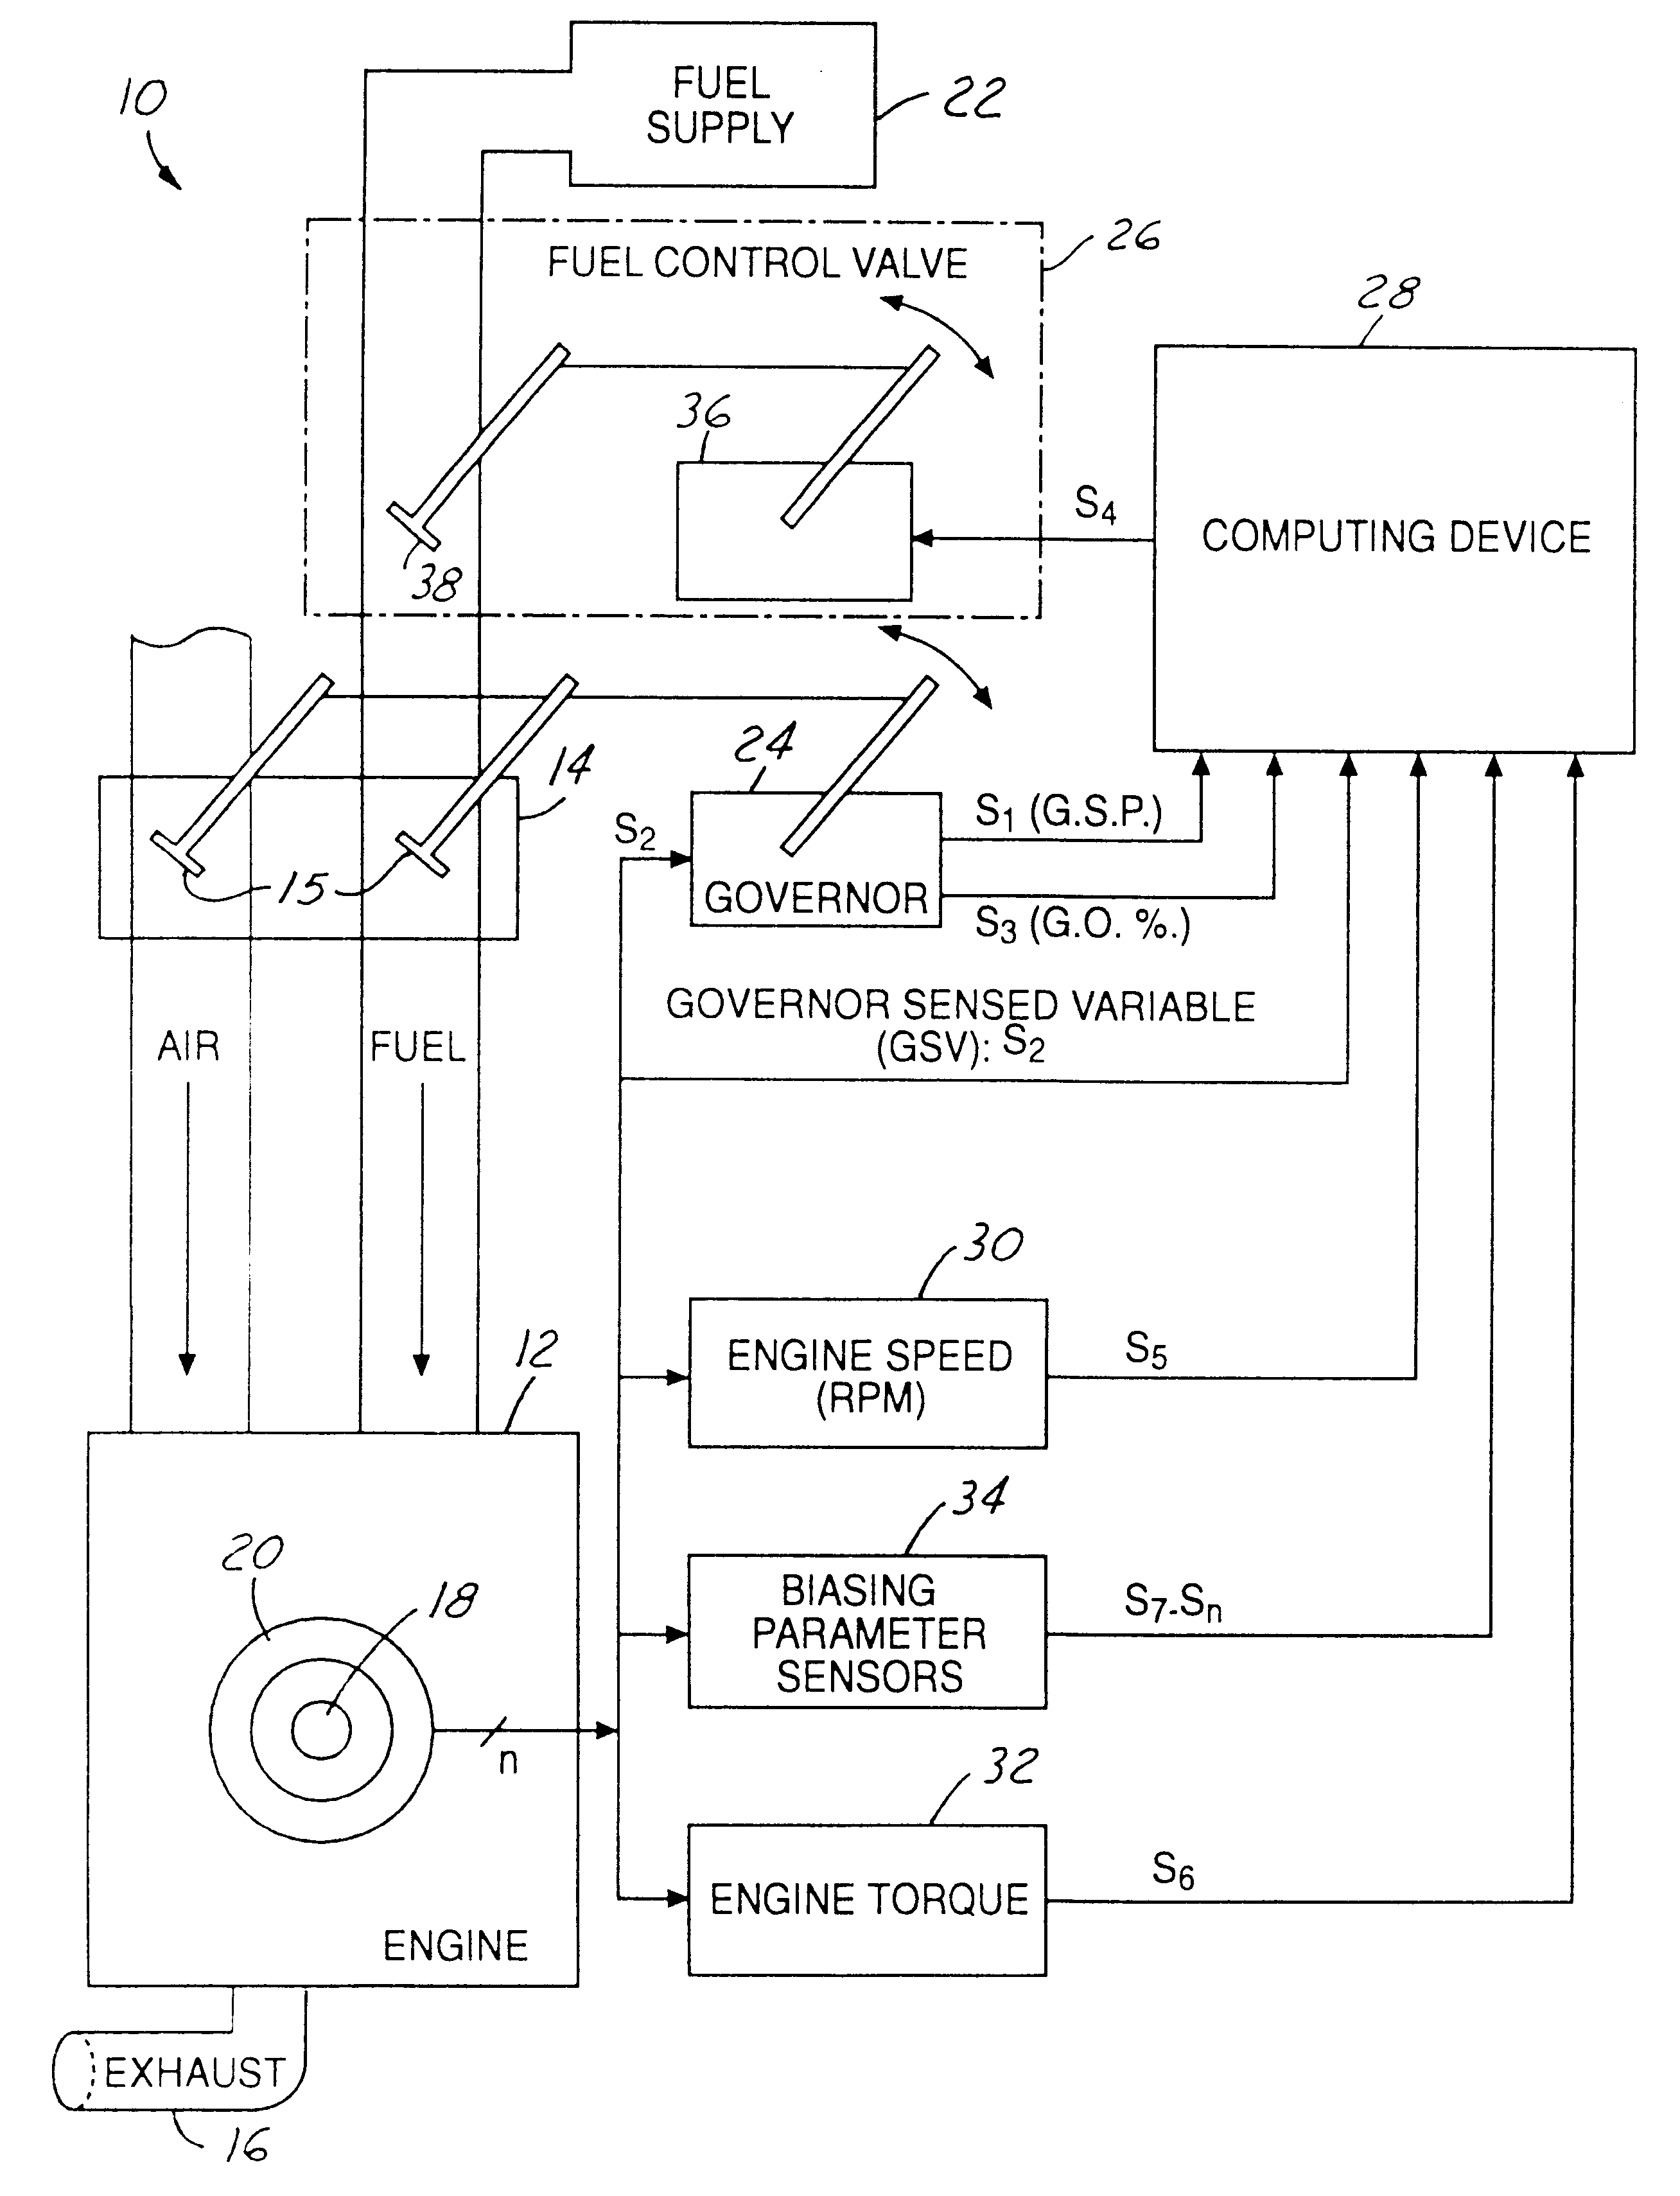 Method and system for controlling an air-to-fuel ratio in a non-stoichiometric power governed gaseous-fueled stationary internal combustion engine